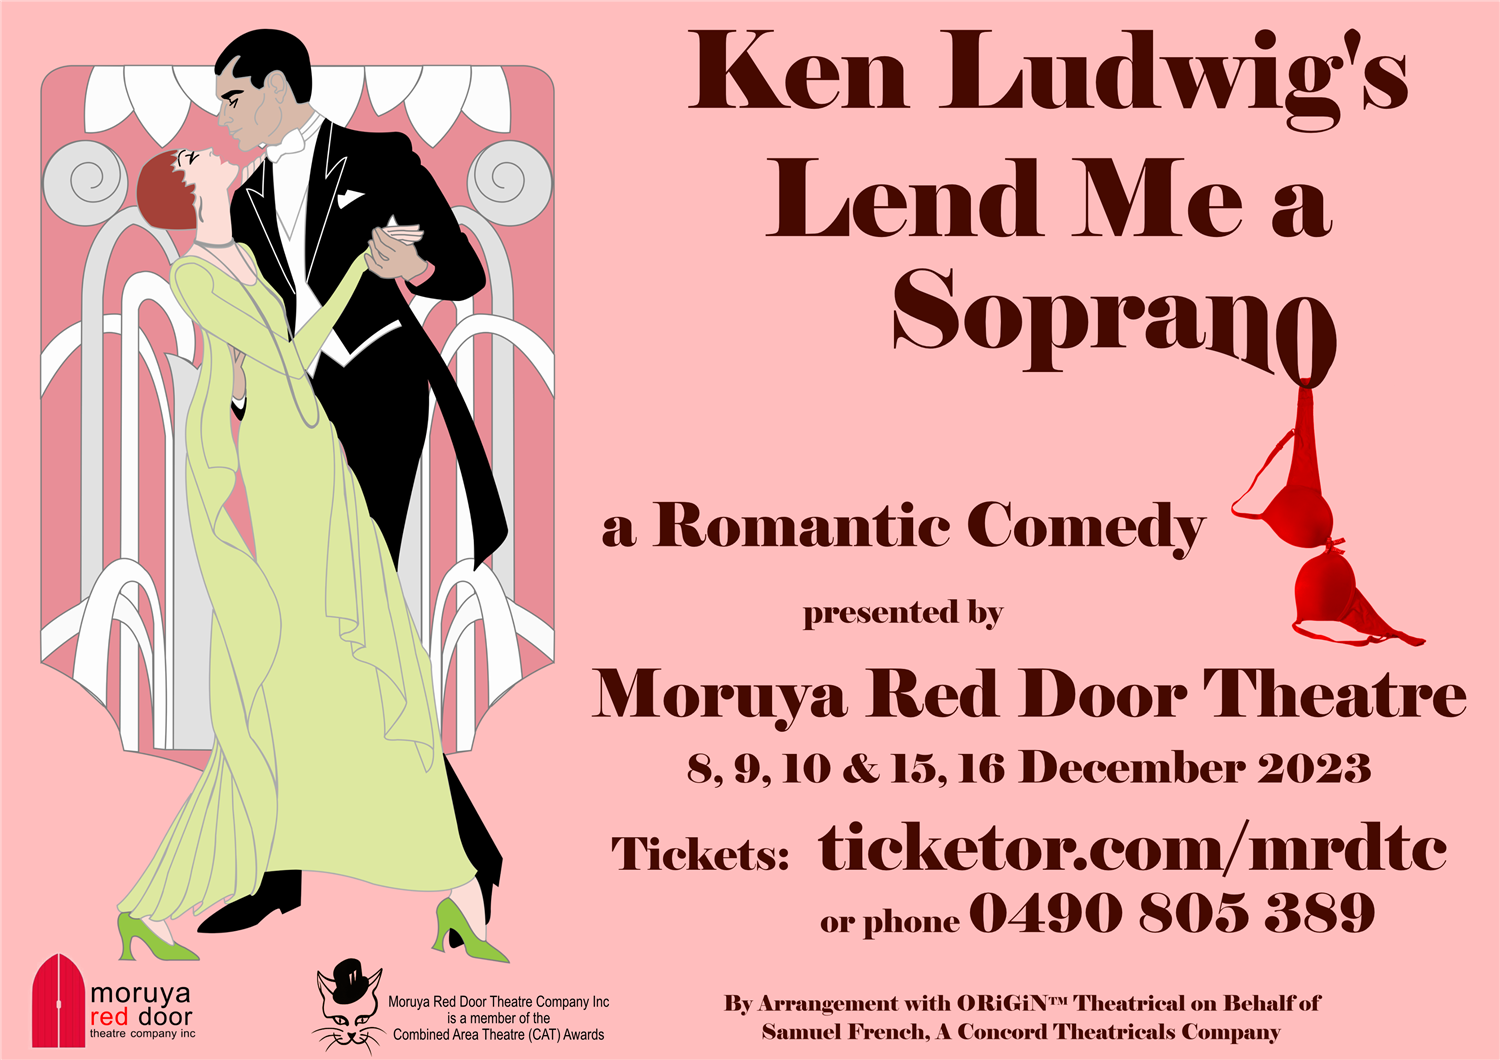 Ken Ludwig's  Lend Me a Soprano One Matinee Only: 10 December 2023 on Dec 10, 14:00@Moruya RSL - Pick a seat, Buy tickets and Get information on Moruya Red Door Theatre 